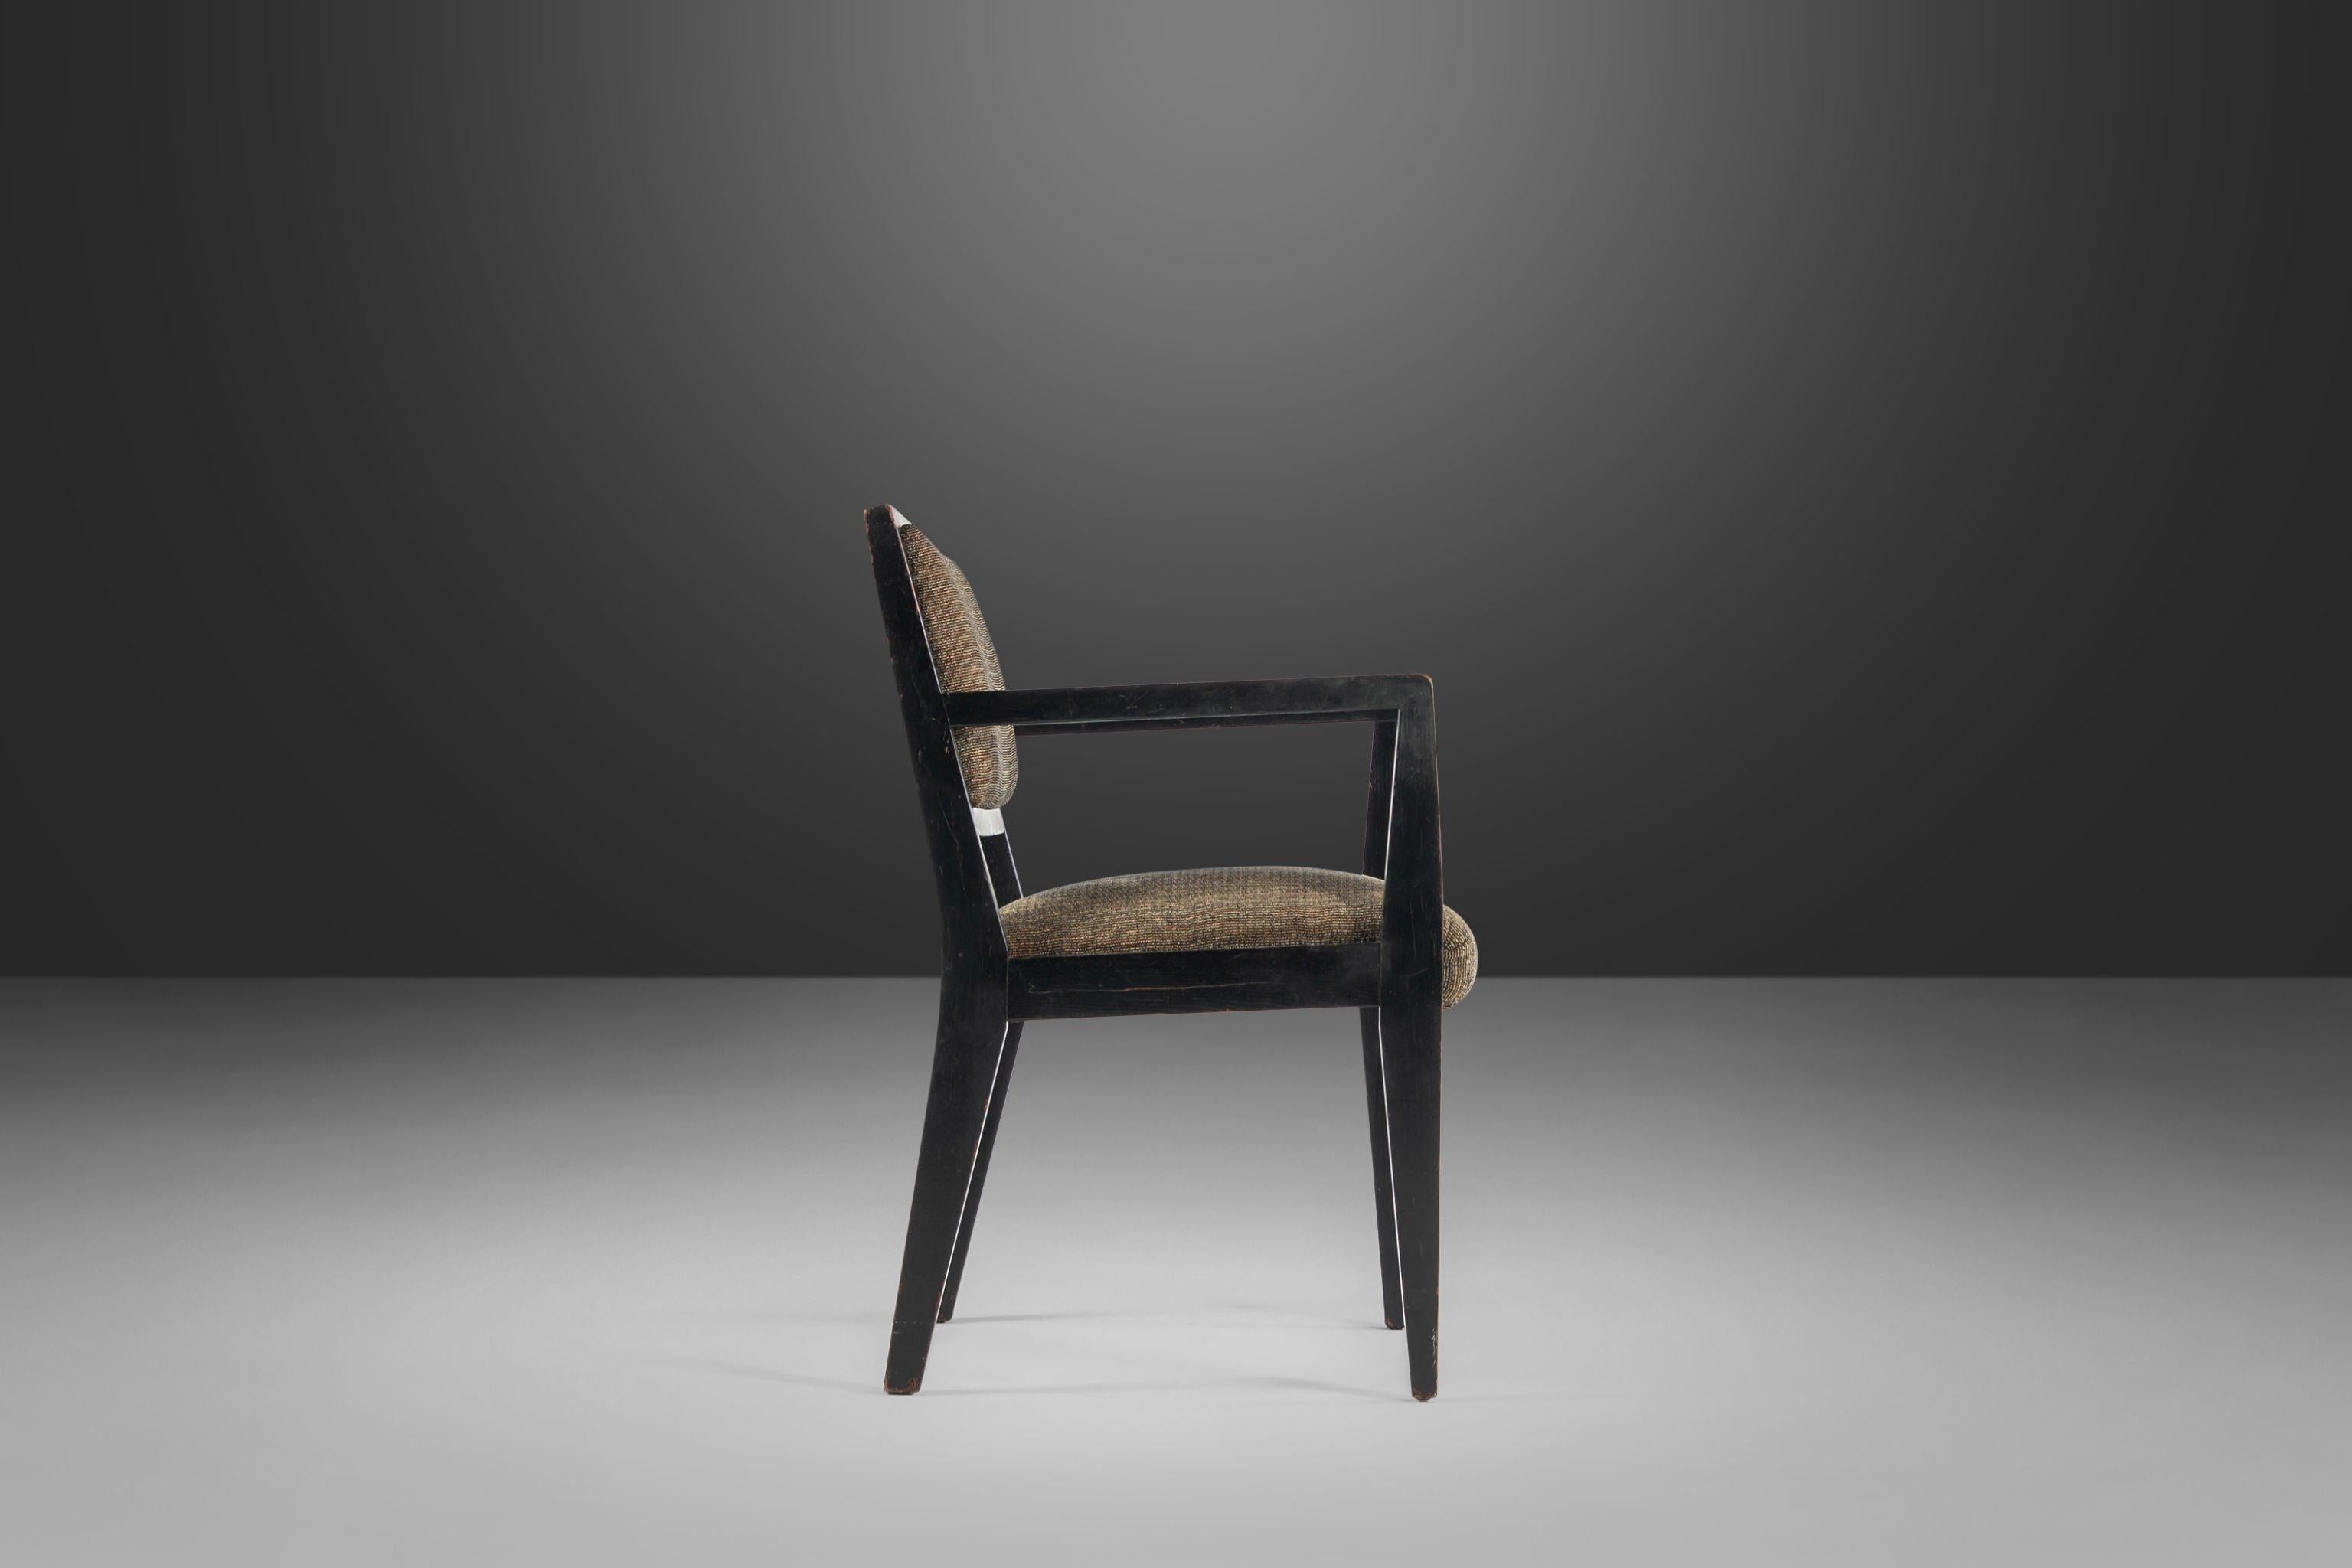 Stately and sophisticated with striking angular lines reminiscent of and often attributed to Edward Wormley for Dunbar. This set of armchairs is constructed from solid walnut and is found in its original tastefully patinaed black paint. The fabric